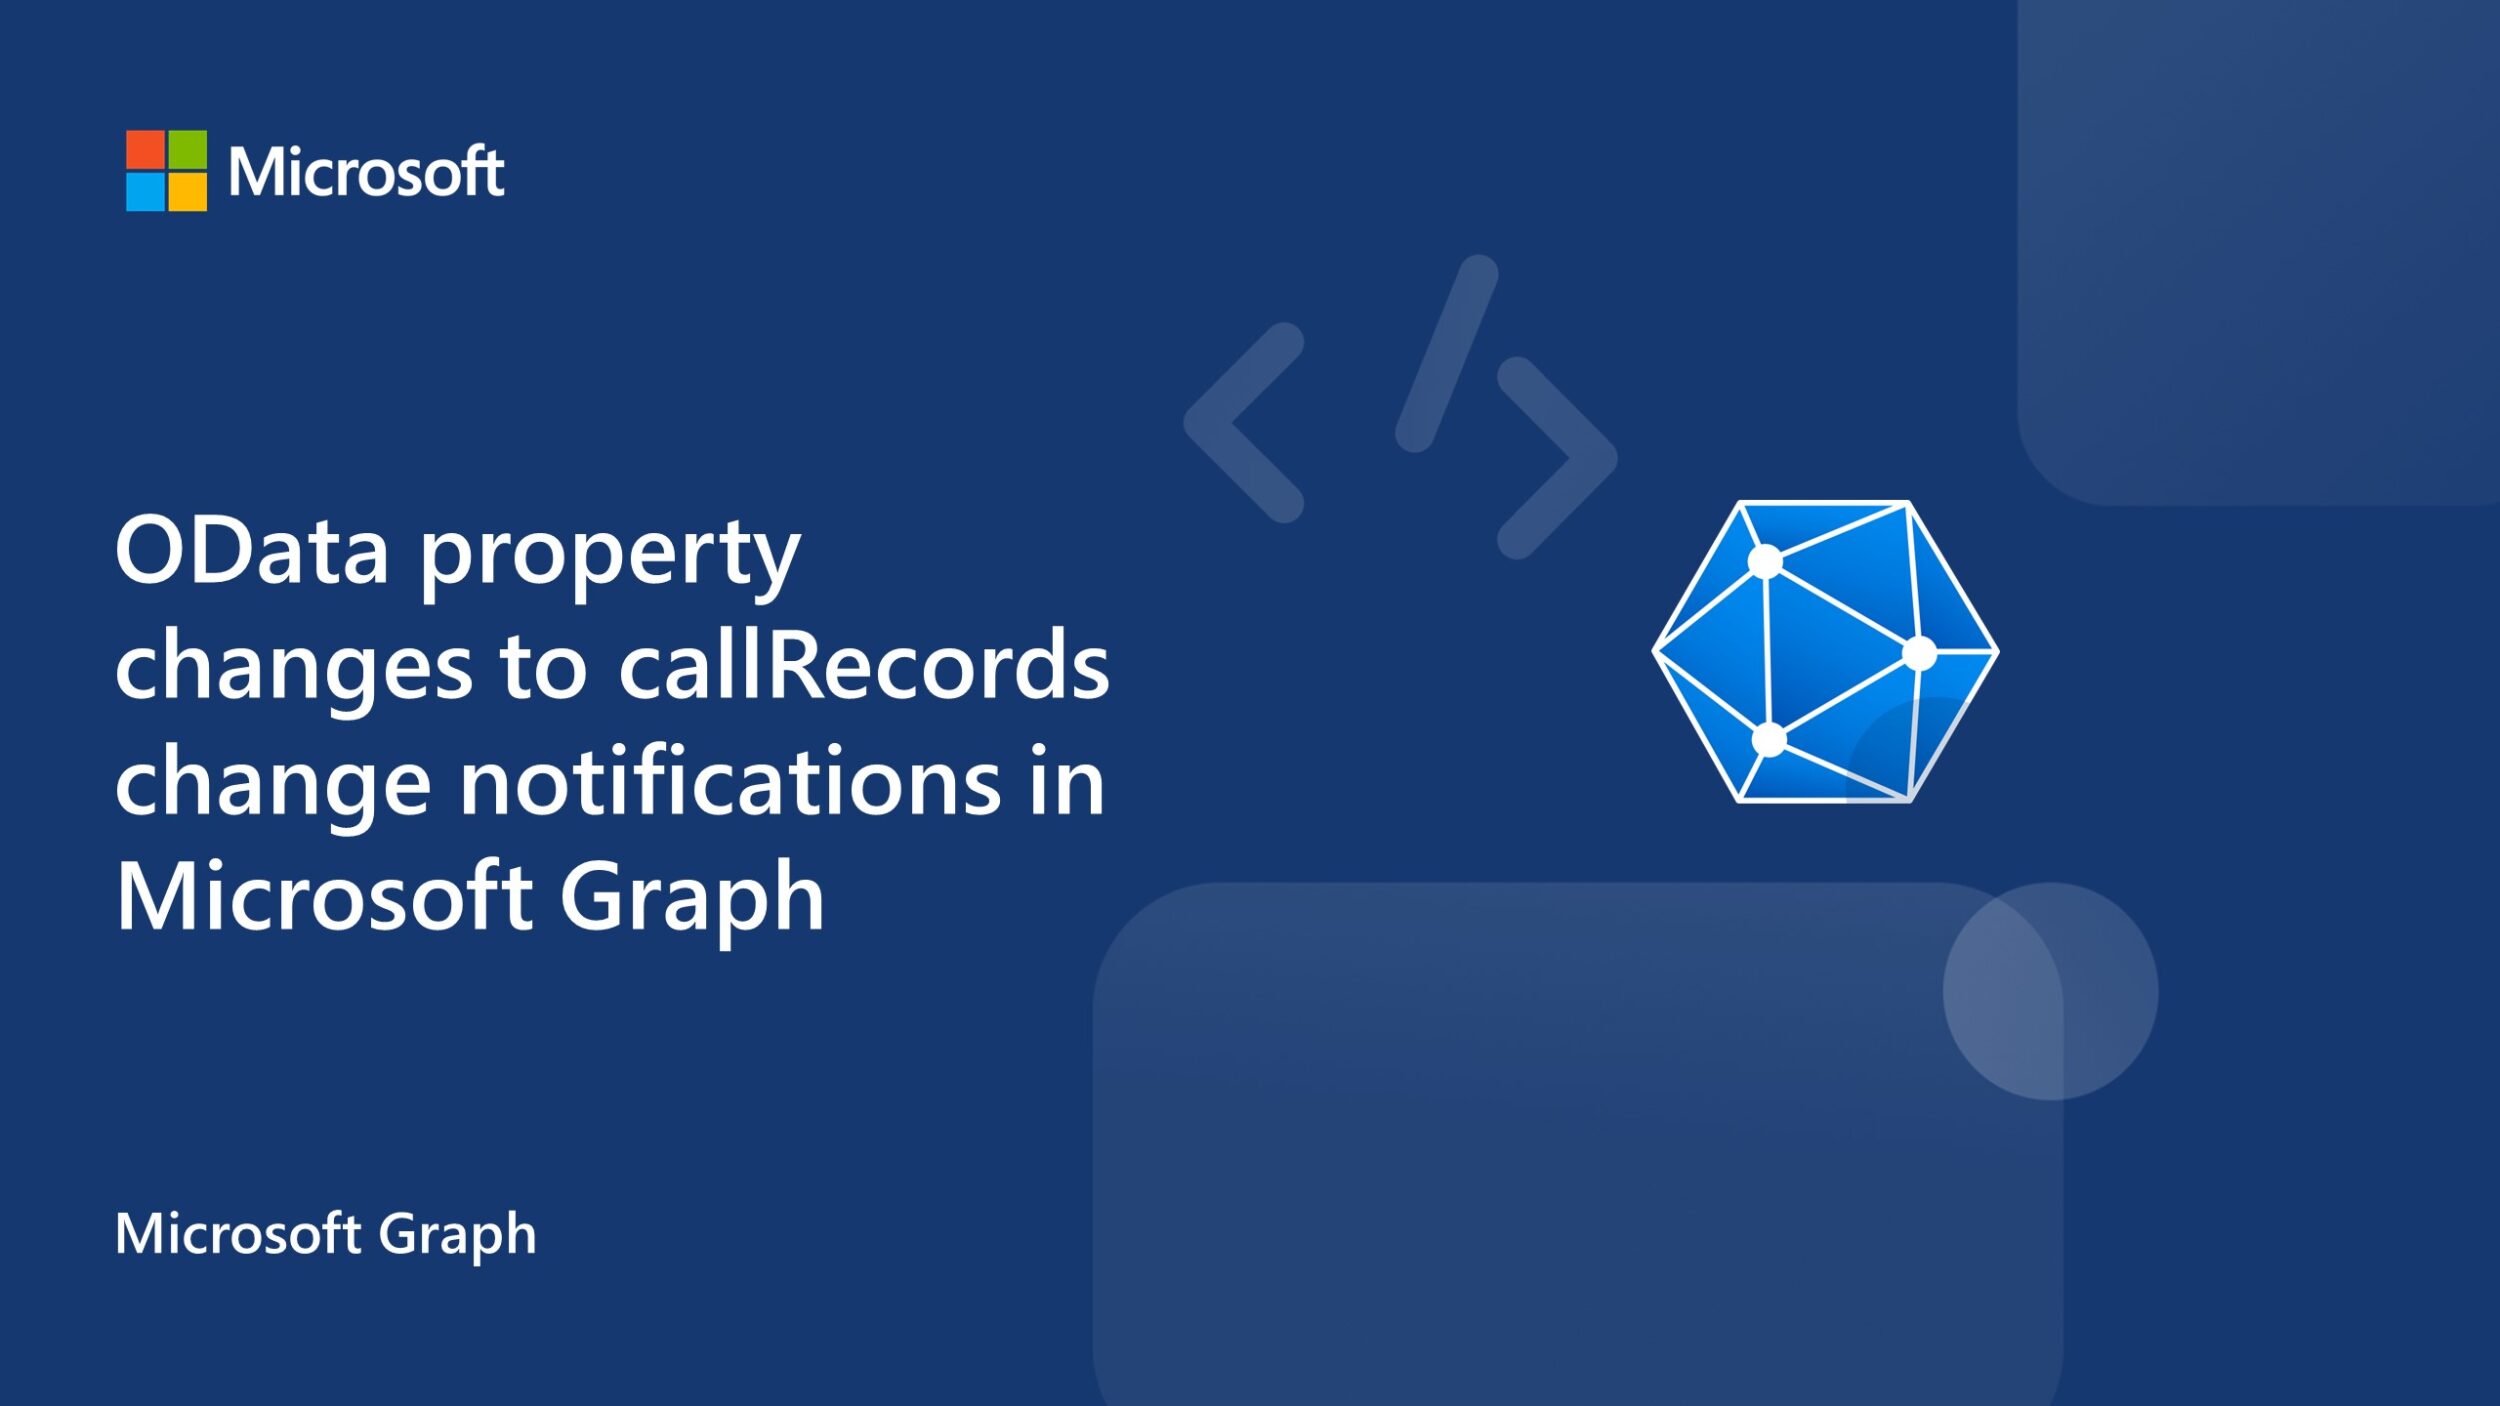 OData property changes to callRecords change notifications in Microsoft Graph